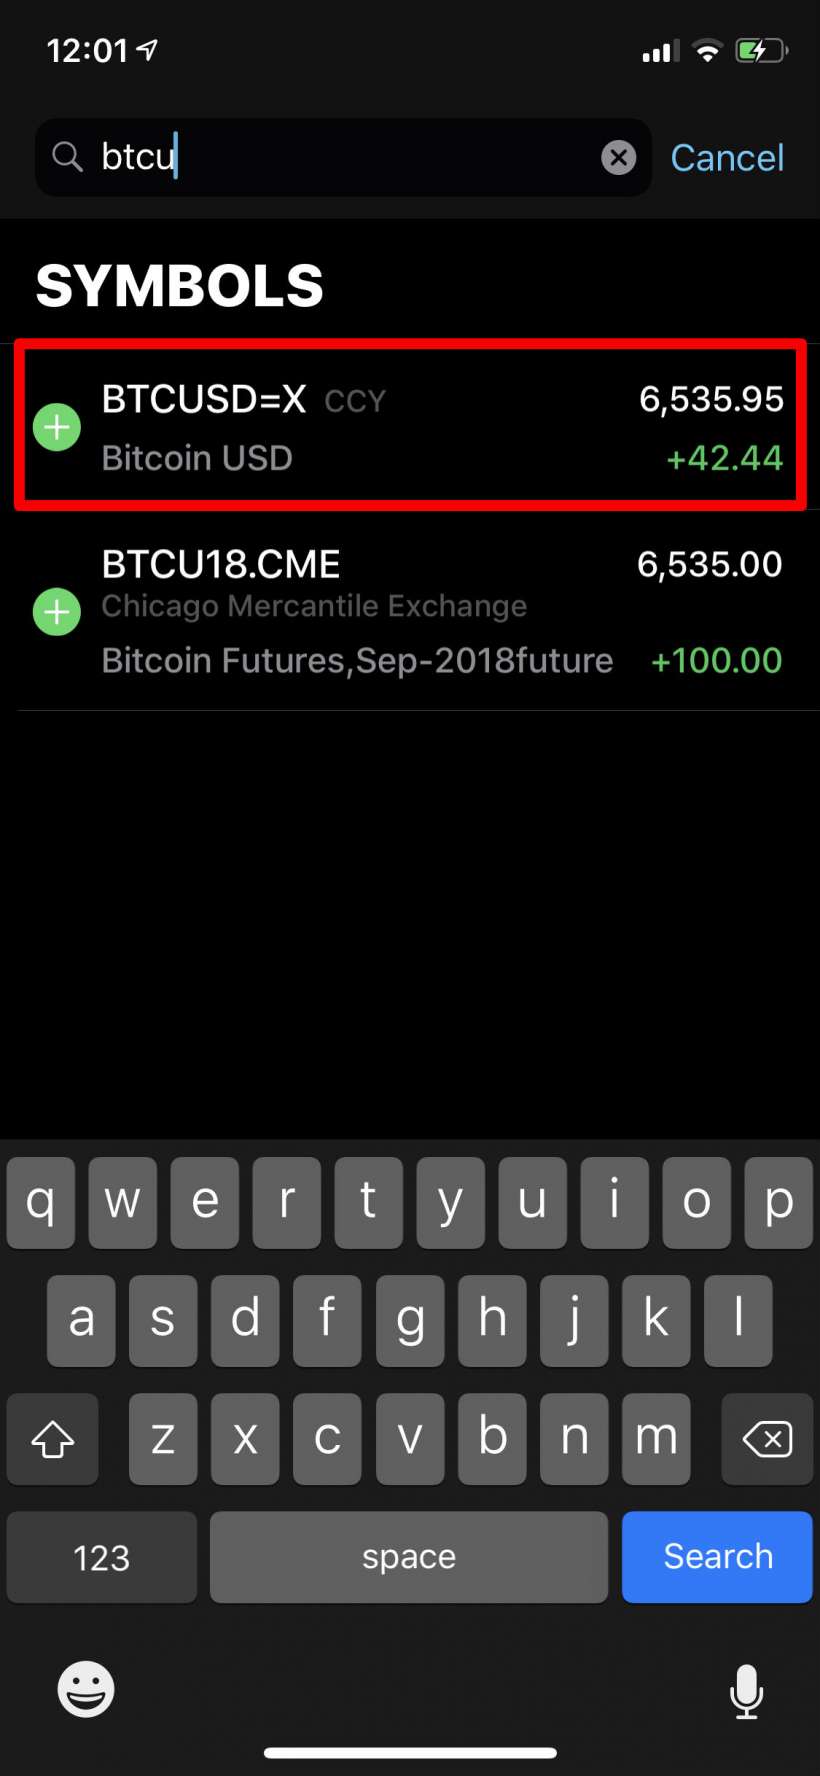 How to watch Bitcoin (BTC), Ethereum (ETH), Ripple (XRP) and other cryptocurrency prices on your Stocks app and Notification Center on iPhone and iPad.